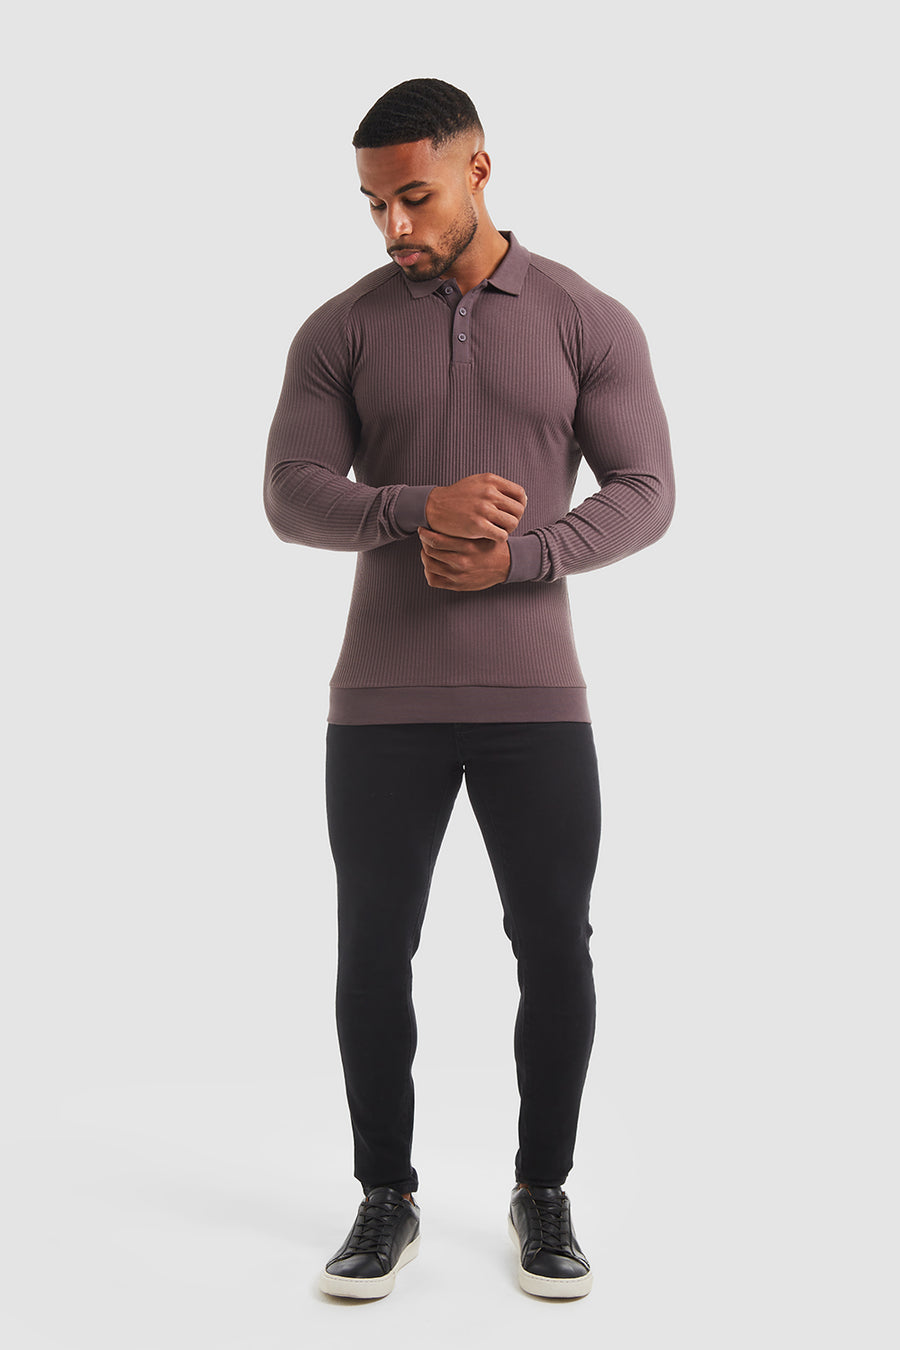 Ribbed Long Sleeve Polo in Truffle - TAILORED ATHLETE - USA